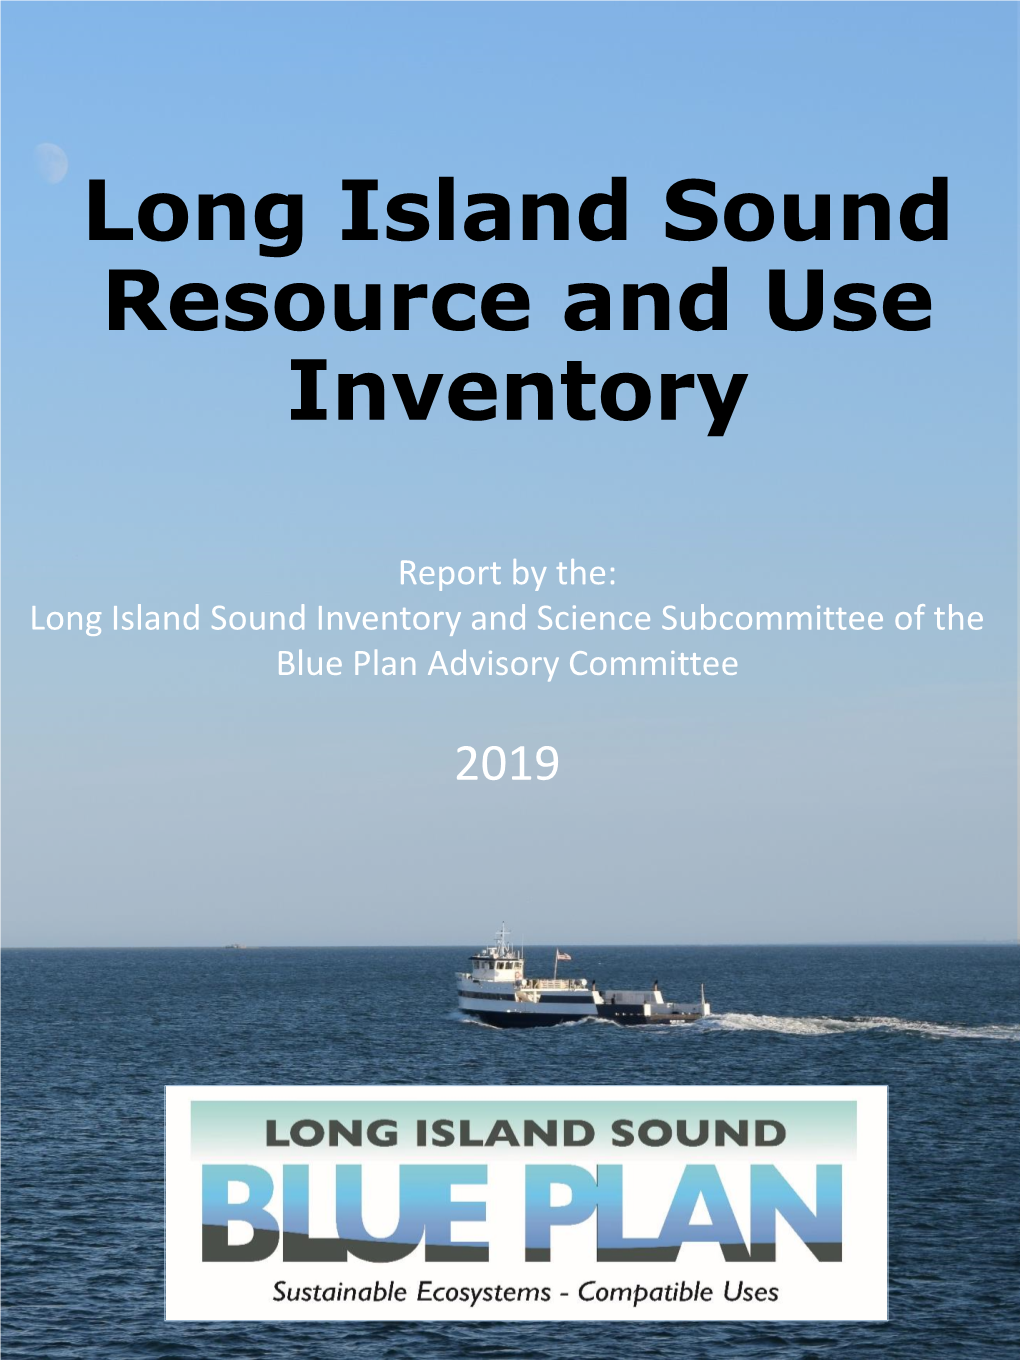 Long Island Sound Resource and Use Inventory